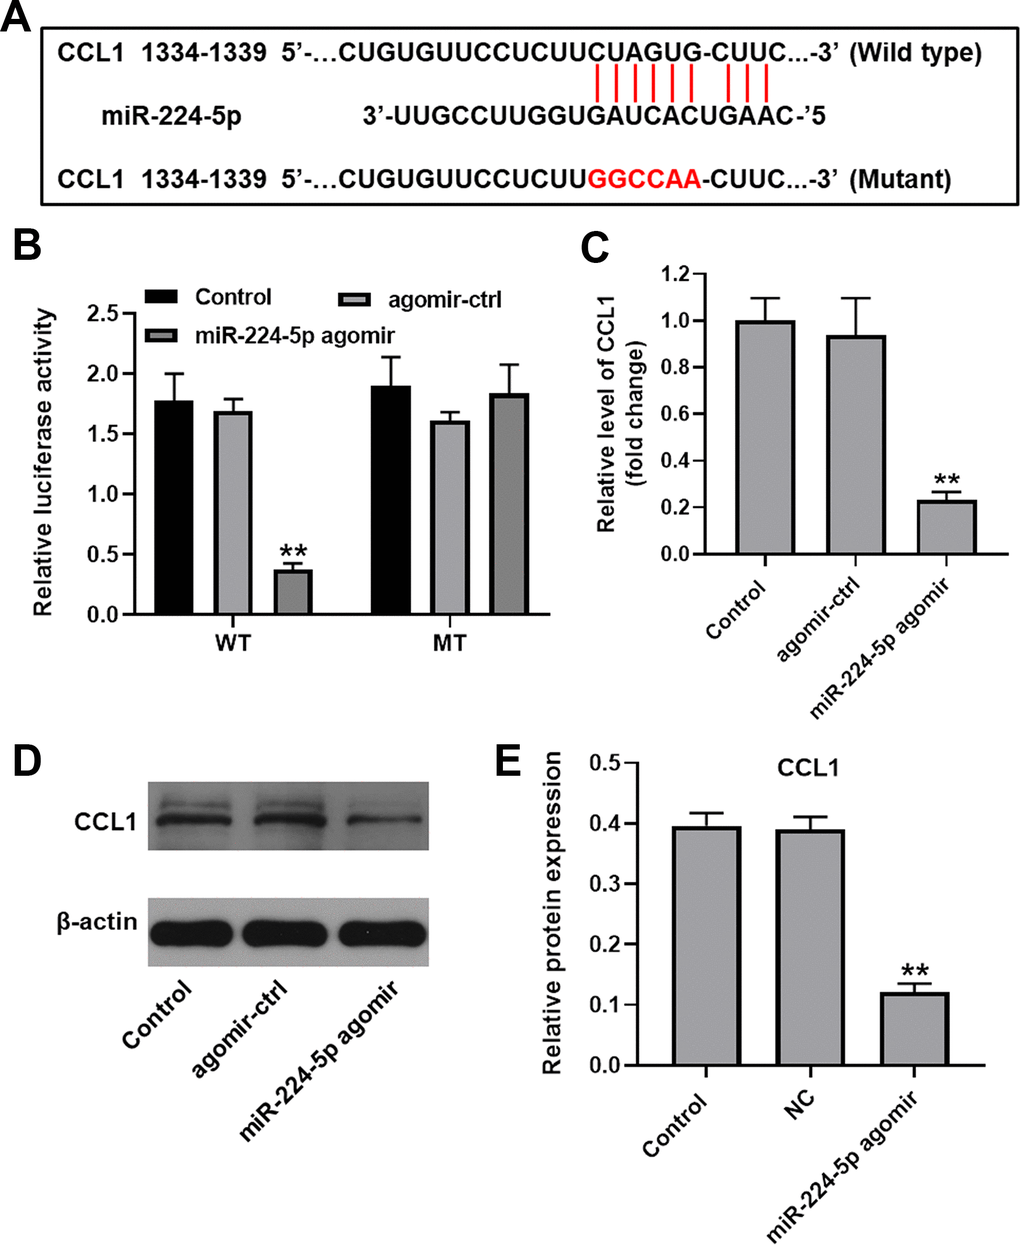 CCL1 is targeted and negatively regulated by miR-224-5p. (A) Diagram showing binding sites for miR-224-5p in the CCL1 mRNA and nucleotide sequence of the mutant CCL1 3’-UTR. (B) A dual-luciferase reporter assay was used to confirm the binding of CCL1 to miR-224-5p. (C) Chondrocytes were treated with miR-224-5p agomir-ctrl or miR-224-5p agomir and RT-qPCR was performed to measure CCL1 levels in cells. (D, E) Western blot was used to detect the level of CCL1. **P